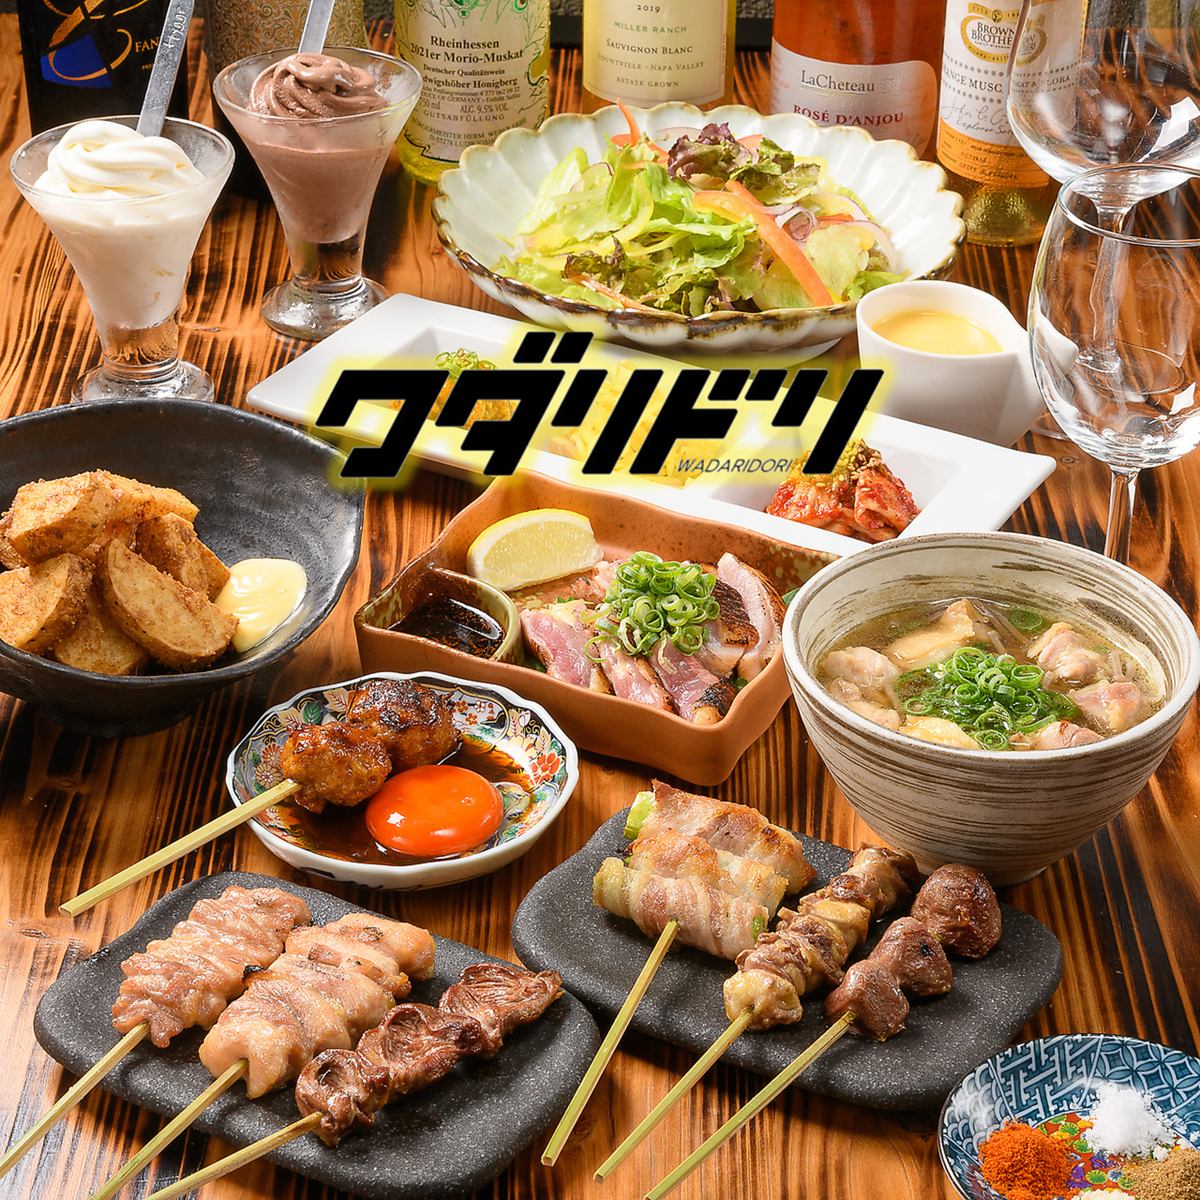 An izakaya where you can enjoy exquisite charcoal-grilled chicken dishes in a stylish and relaxing interior.